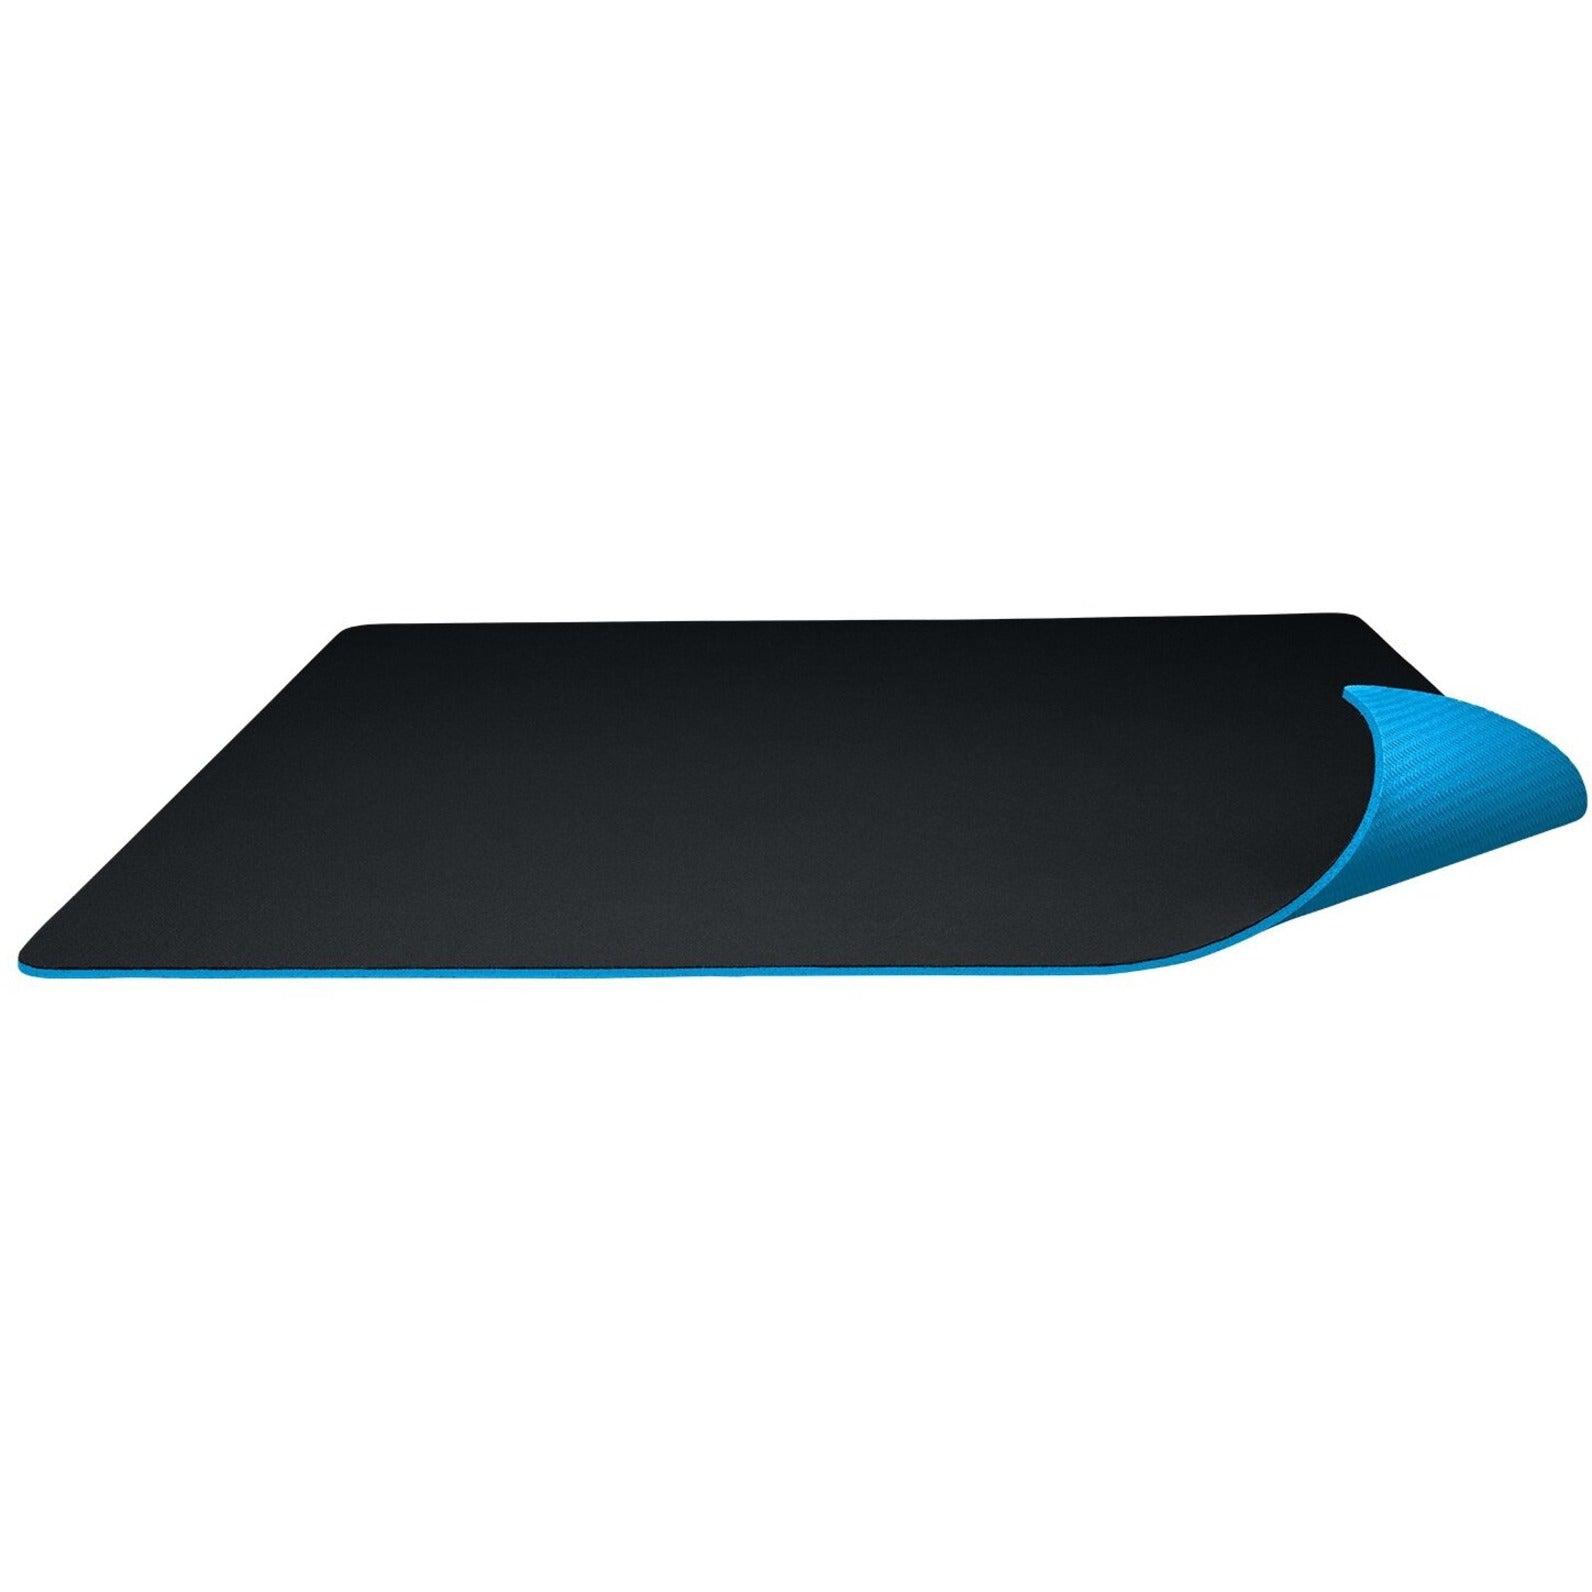 Logitech G 943-000093 G240 Cloth Gaming Mouse Pad, Black, Neoprene and Rubber Surface Material